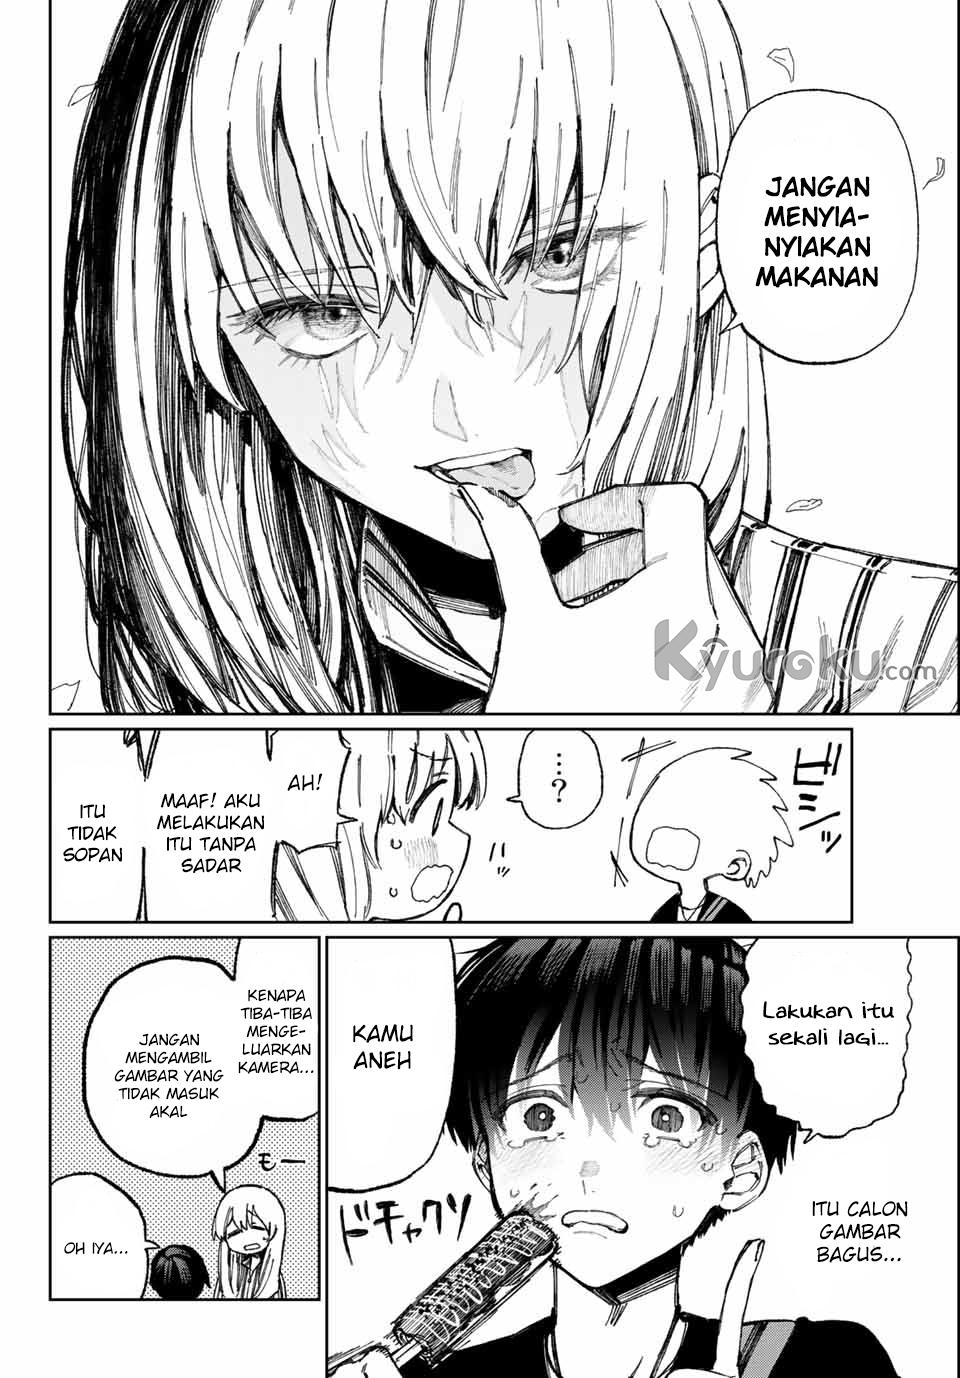 That Girl Is Not Just Cute Chapter 14